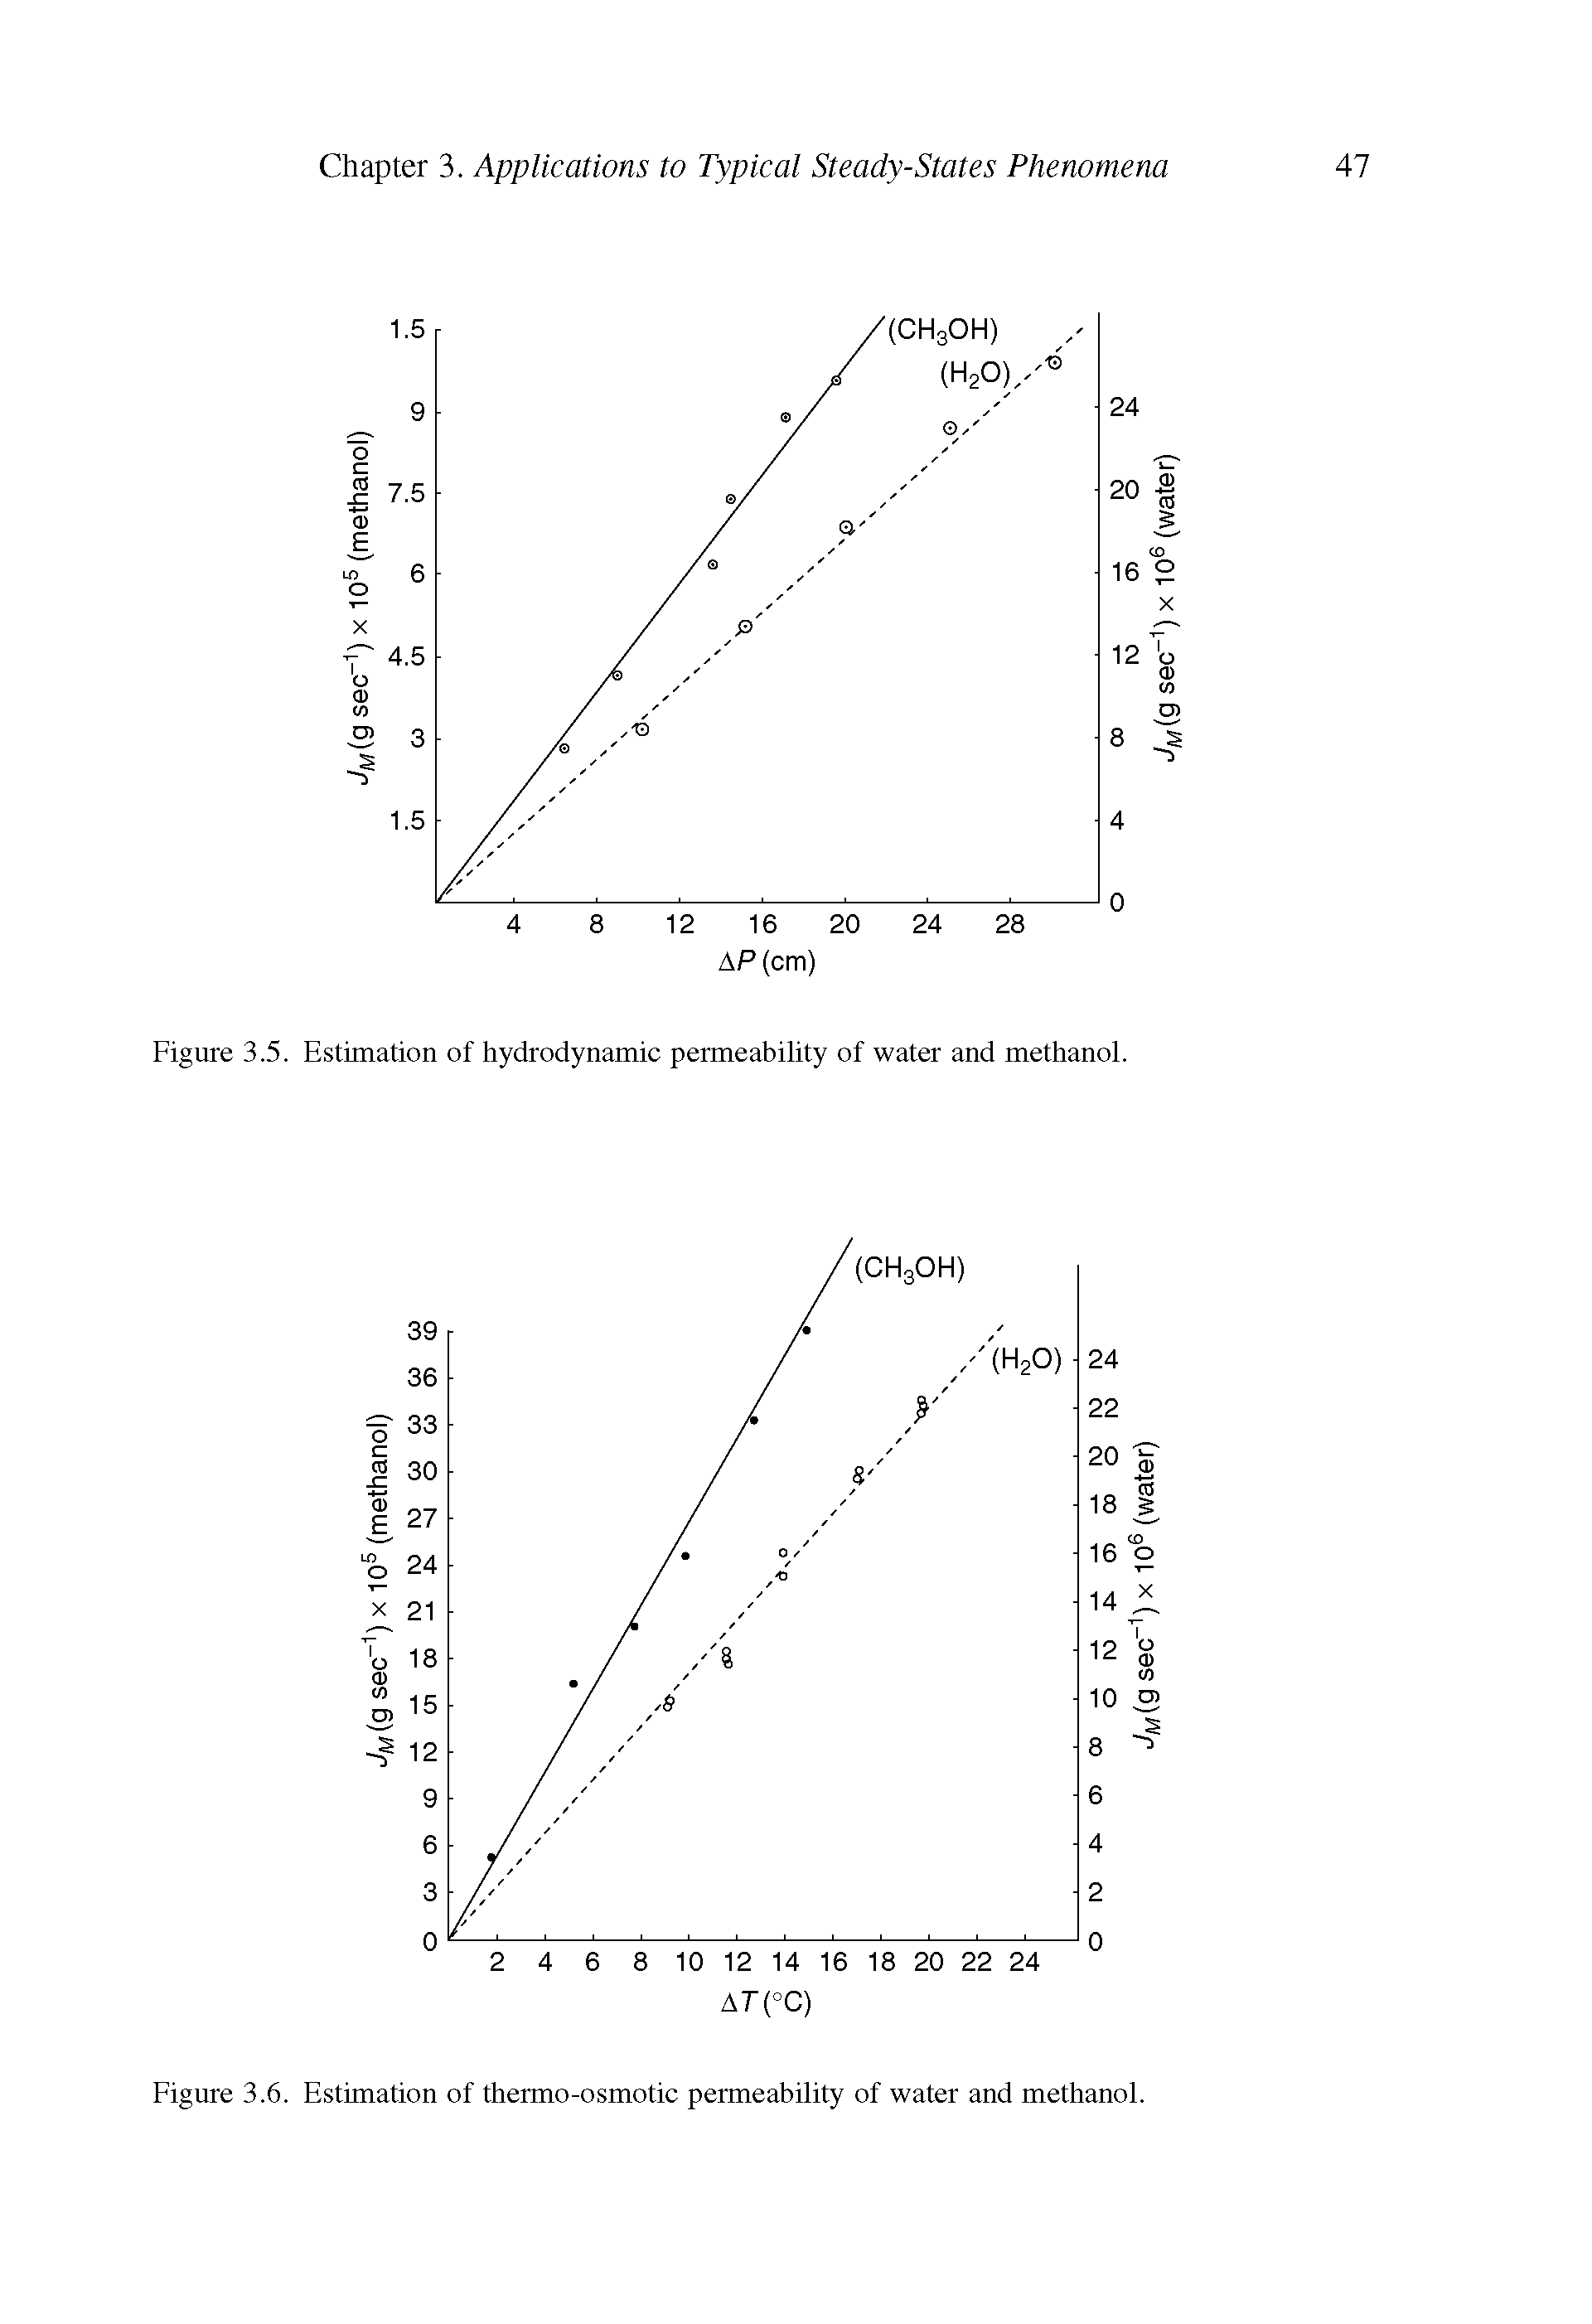 Figure 3.6. Estimation of thermo-osmotic permeability of water and methanol.